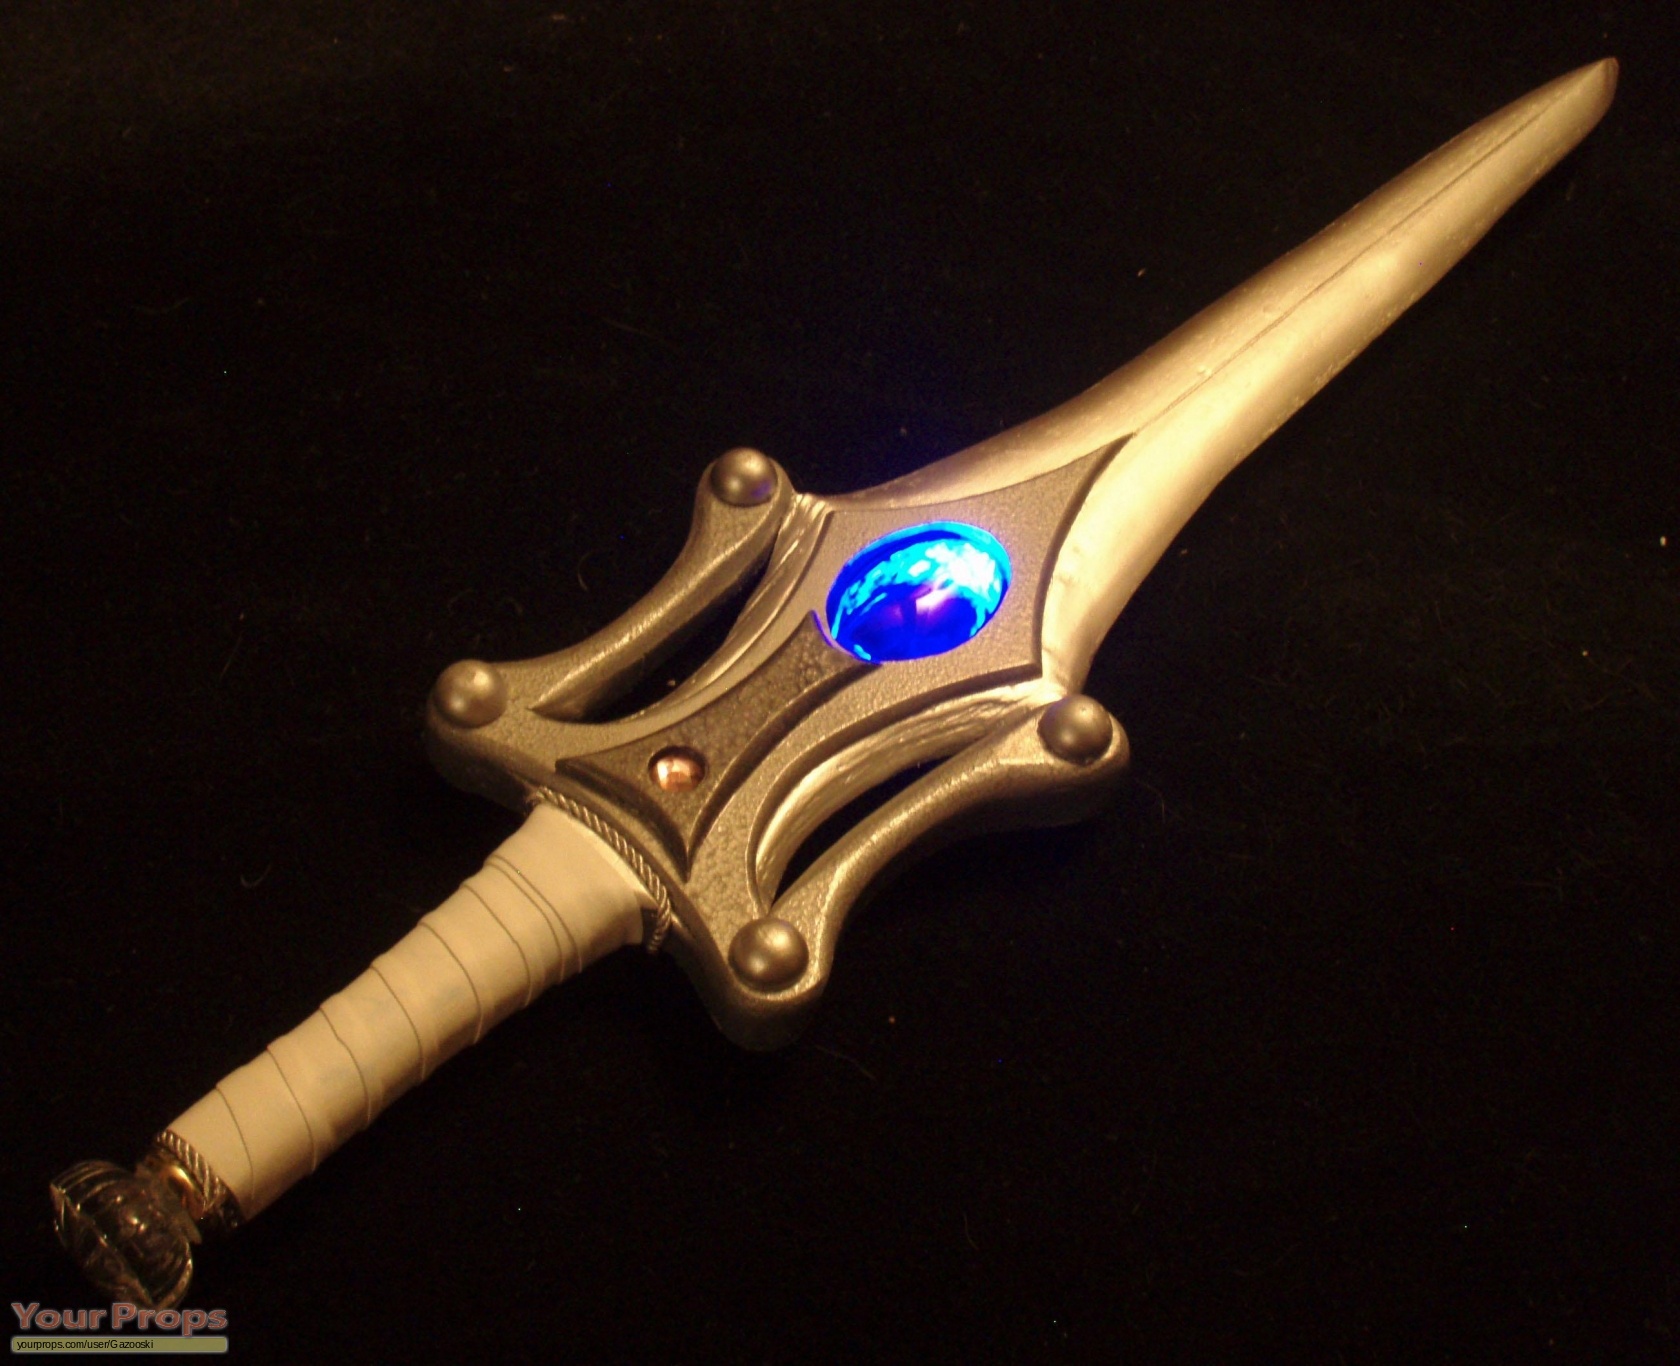 She-Ra's Sword of protection, hand crafted of wood. 